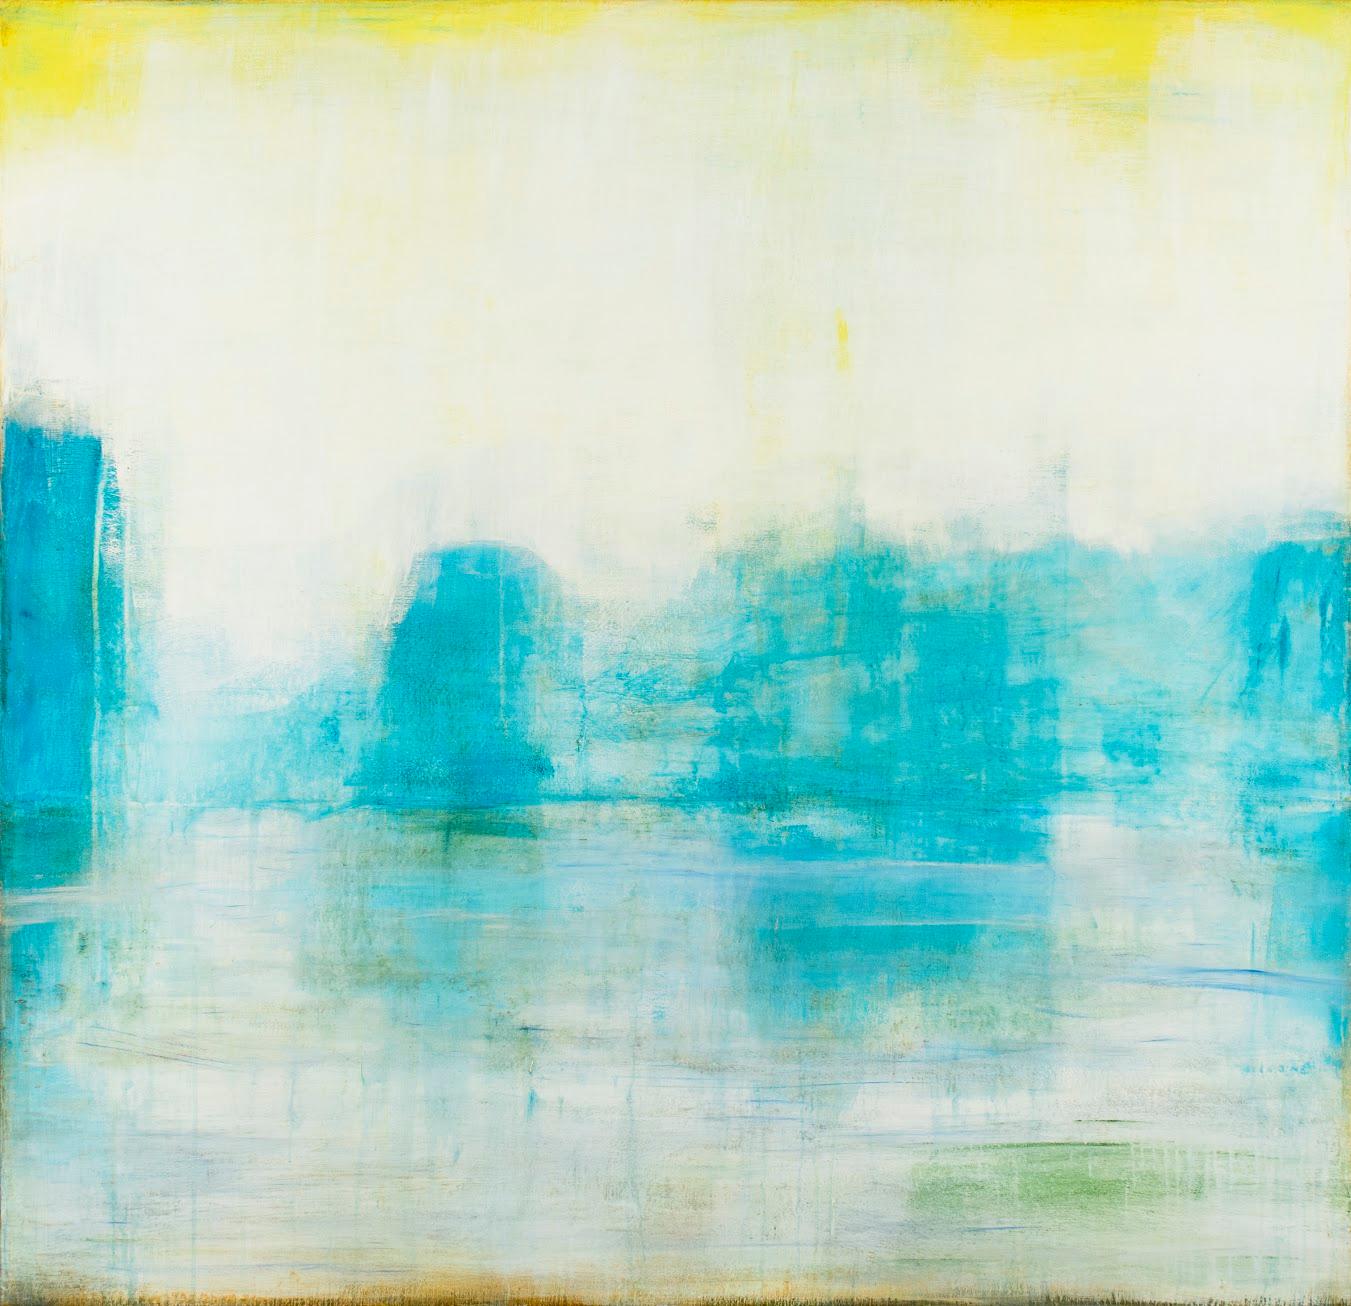 "Changiness"   Luminous Abstraction in Yellow/White/Turquoise   Water Reference 